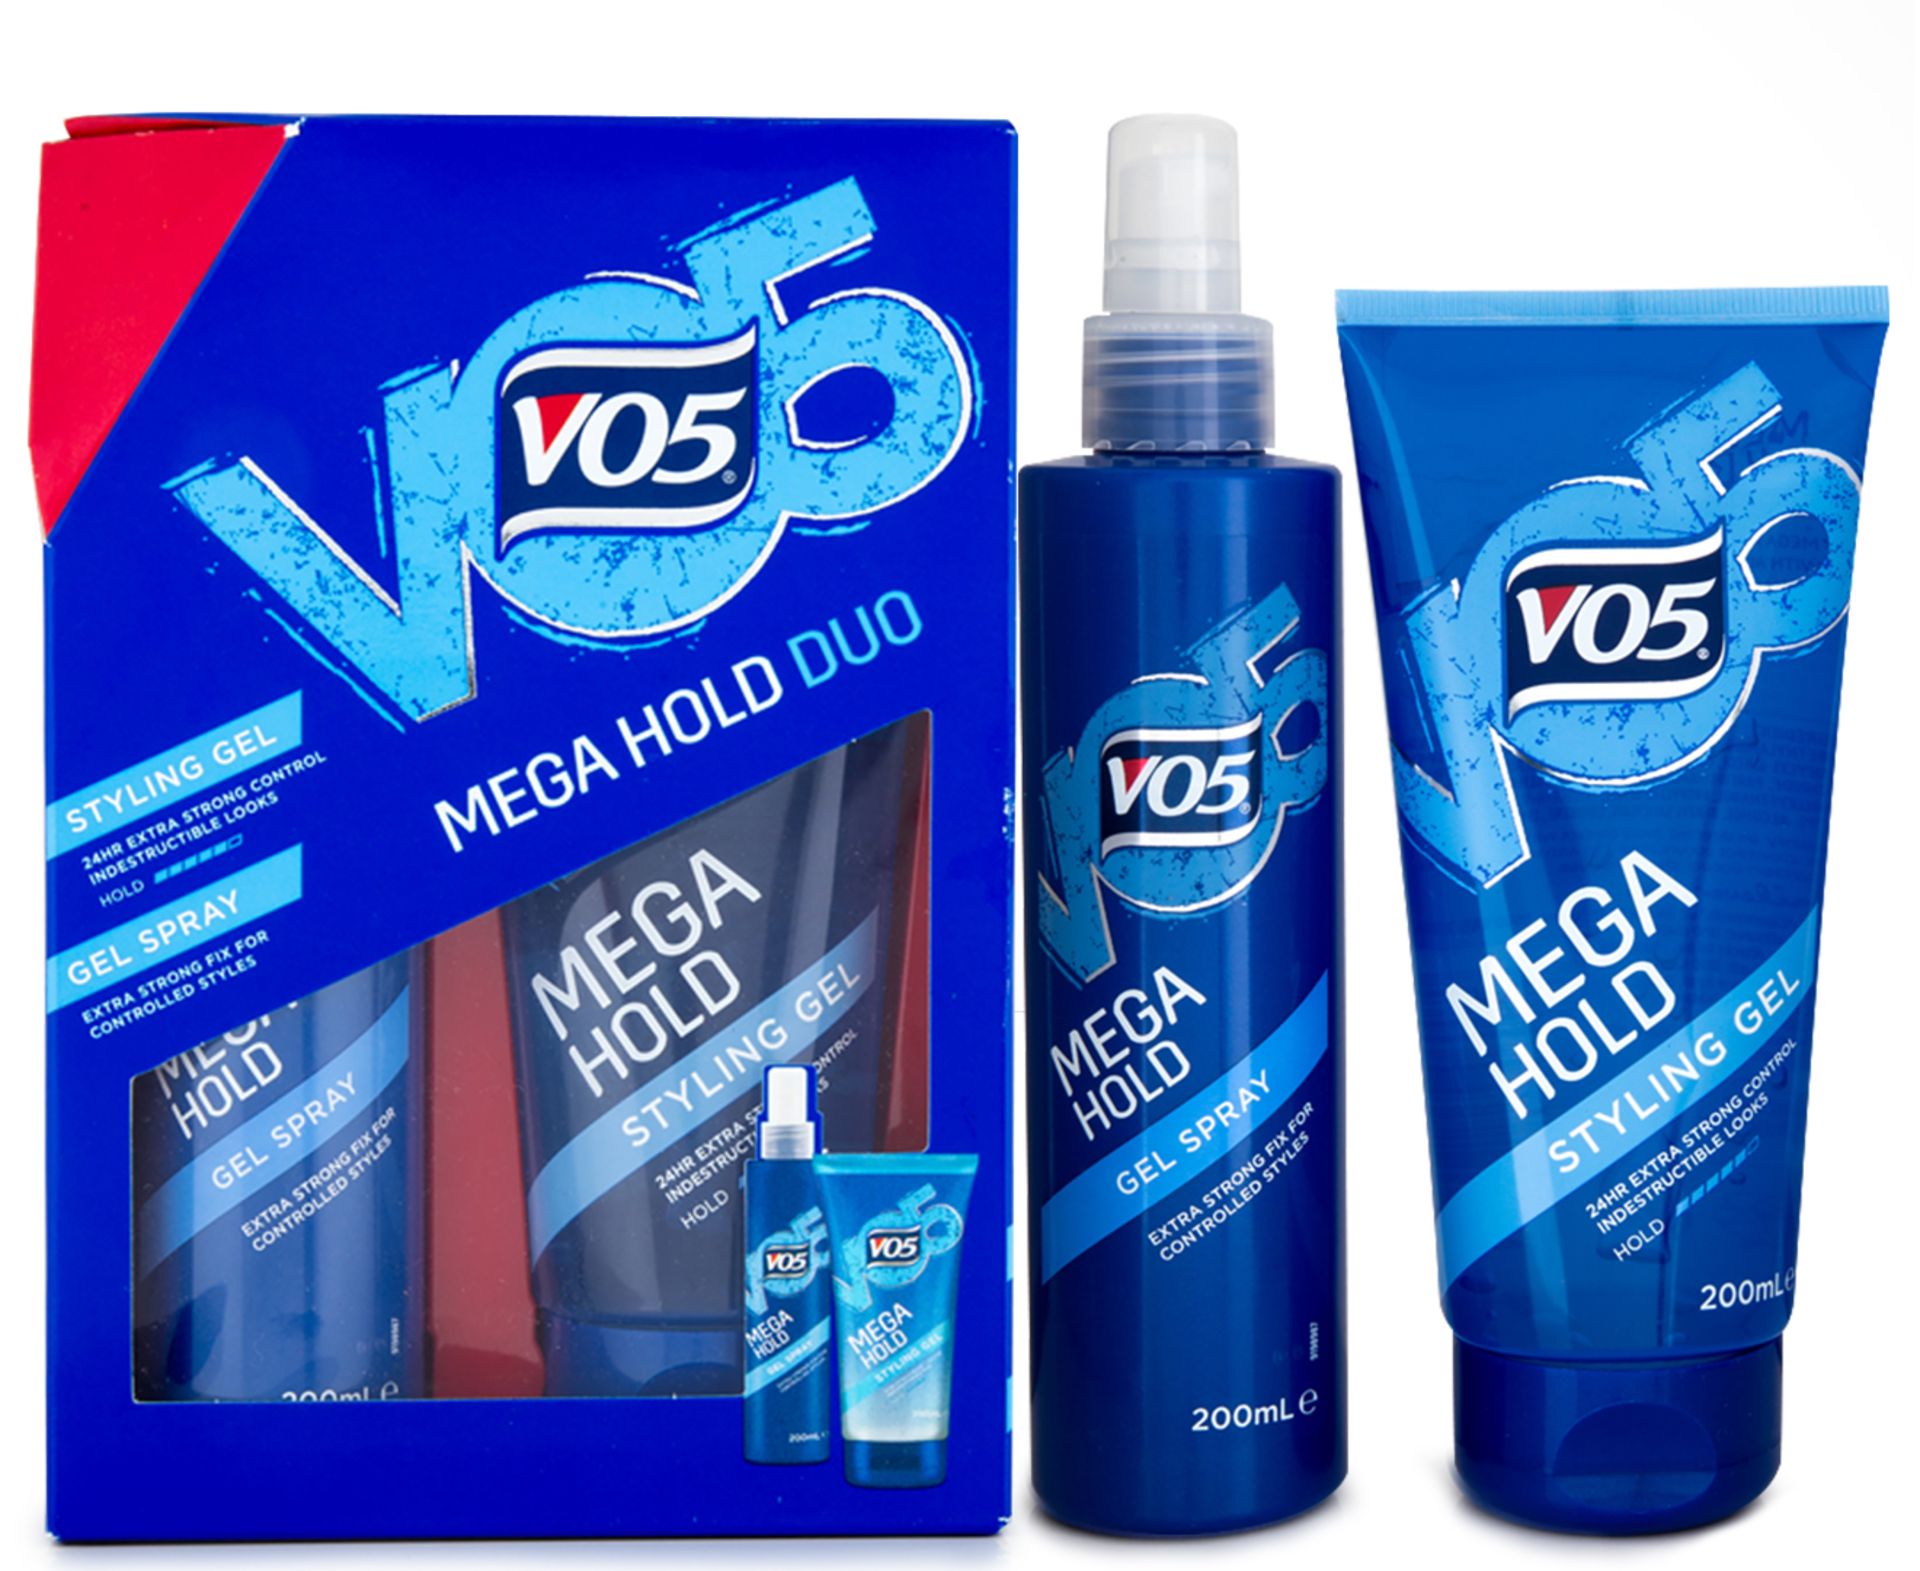 V Brand New Vo5 Mega Hold Duo Gift Set Inc 24HR Extra Strong Control Styling Gel & Extra Strong